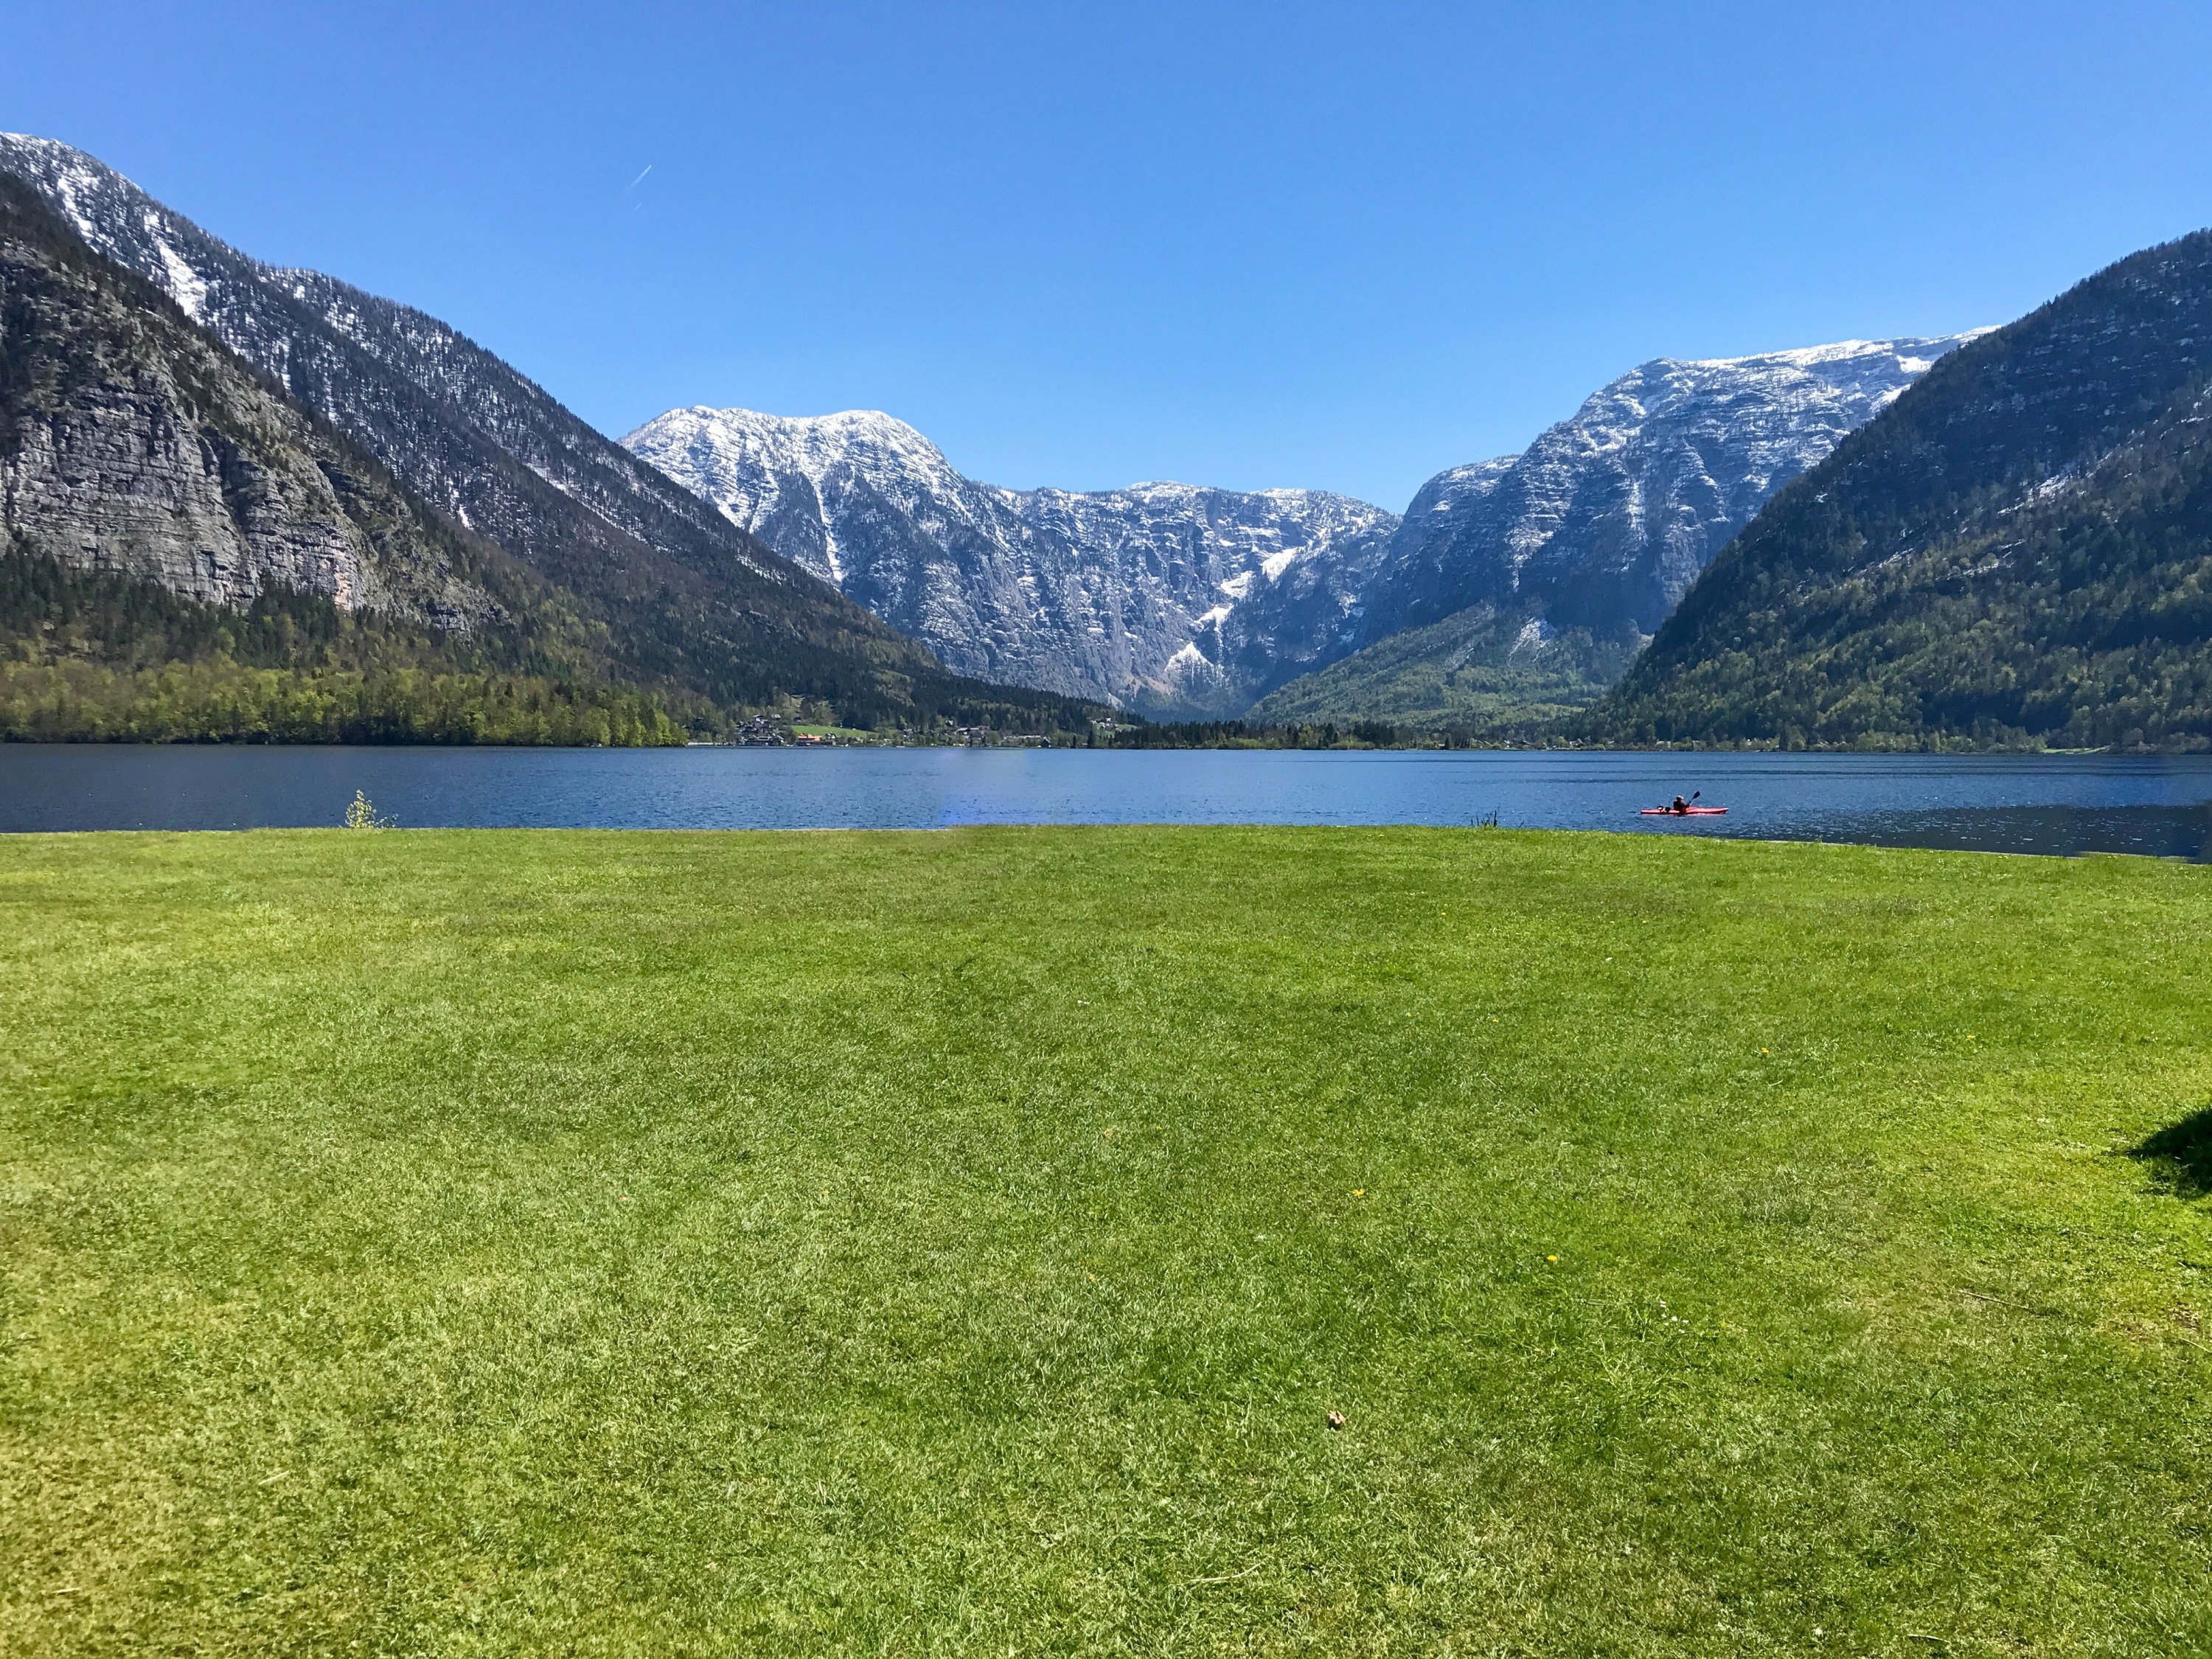 A view of the green pastures before the lake and the Alps, in Hallstatt, Austria. (Photo by Özge Şengelen)